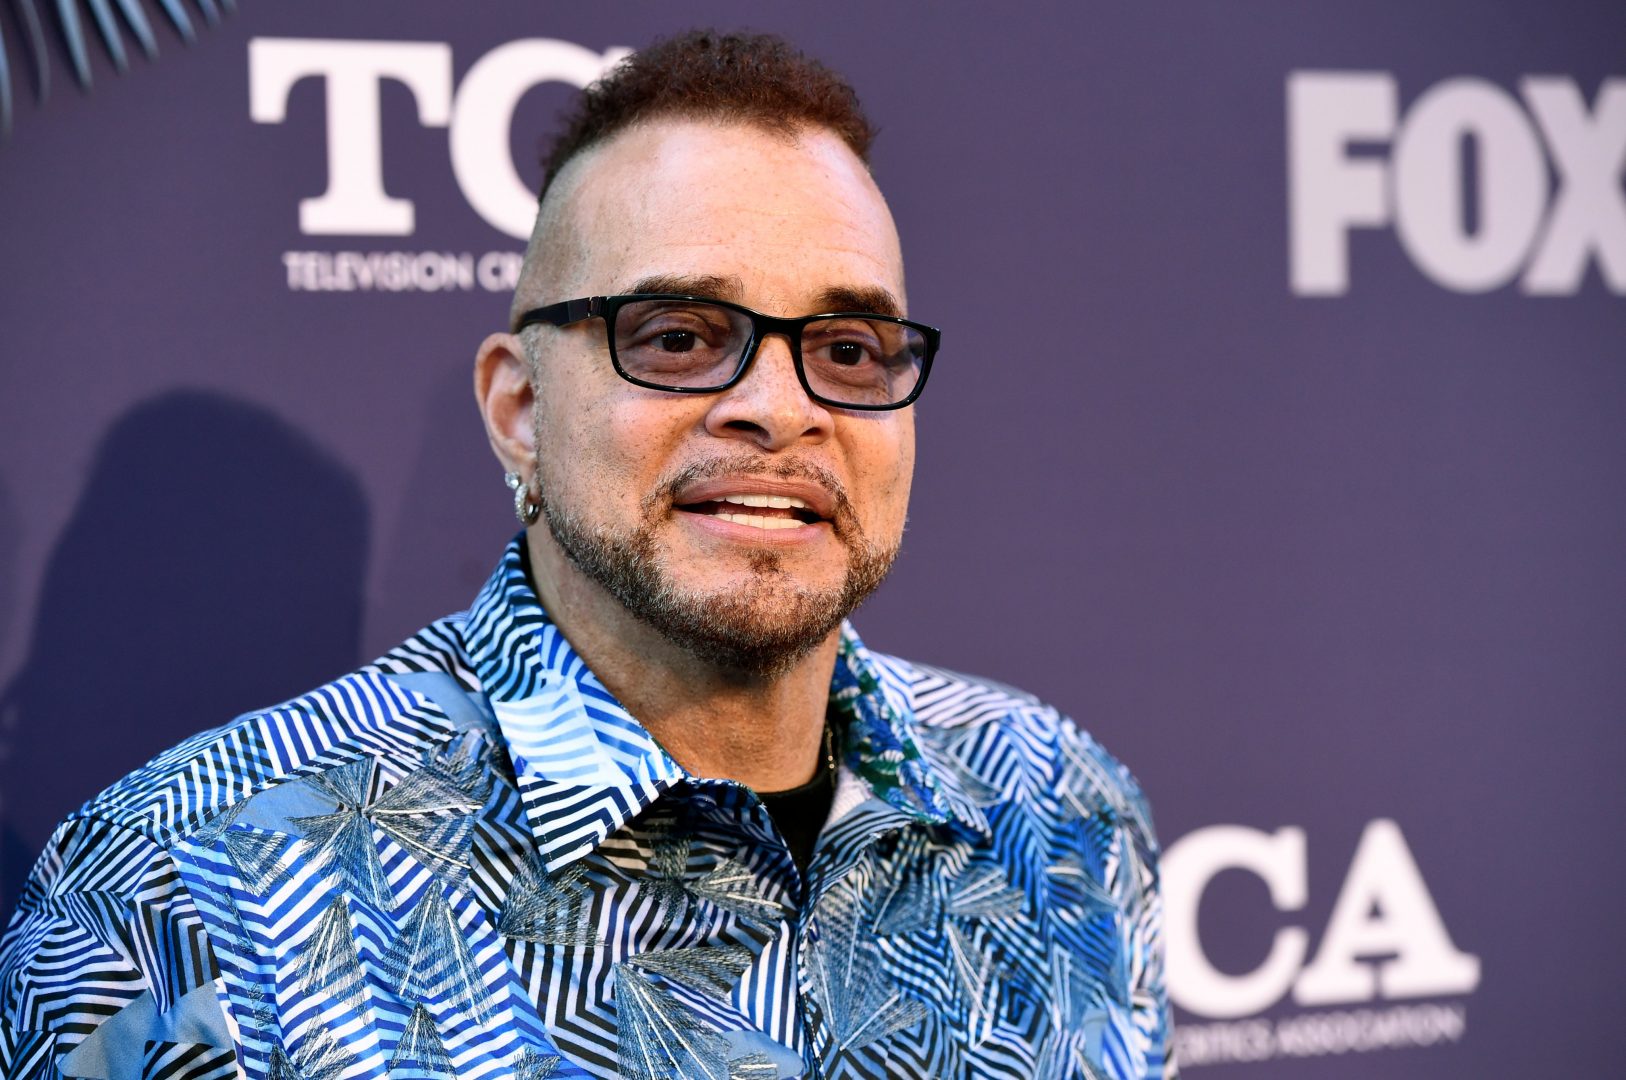 Comedian Sinbad recovering from stroke, according to family